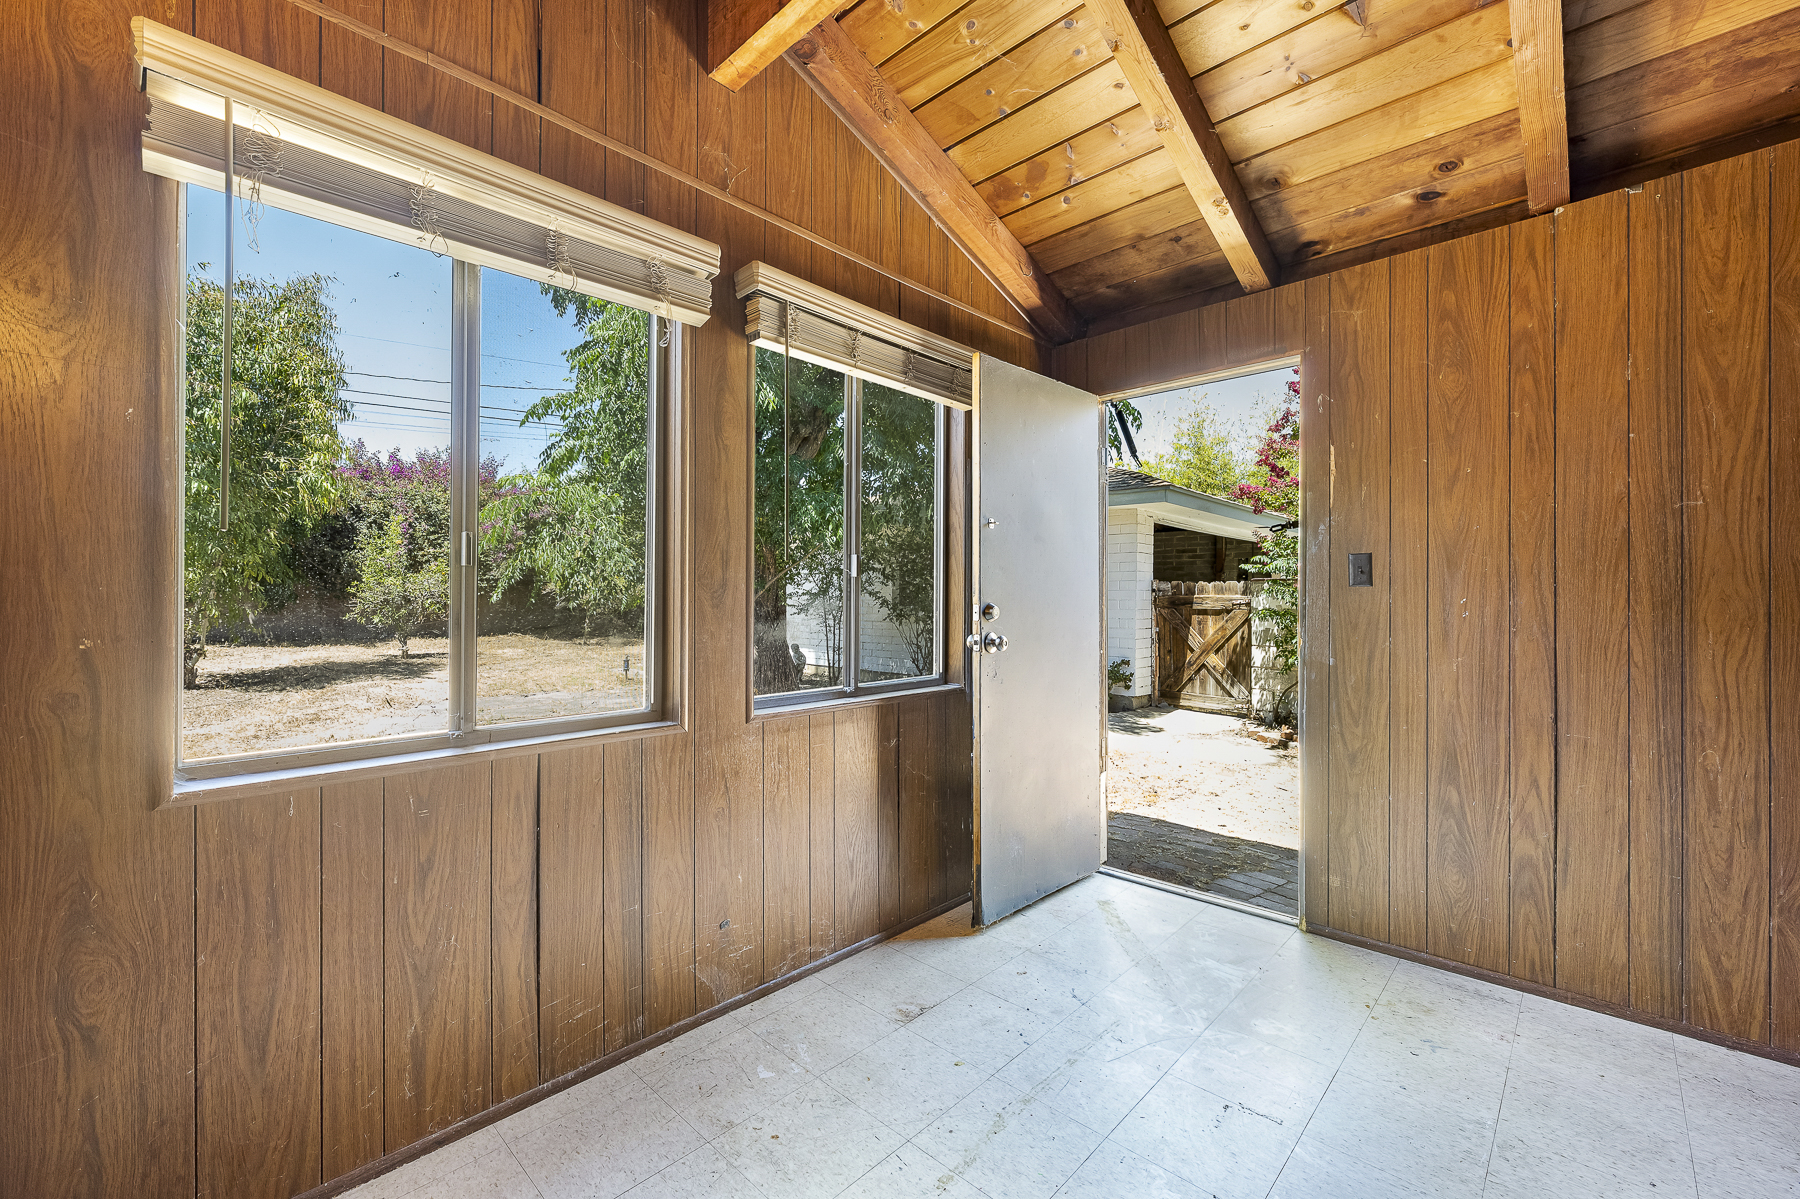 319 E. Francis Ave, La Habra, CA 90631: Wood panel room with view outdoors.